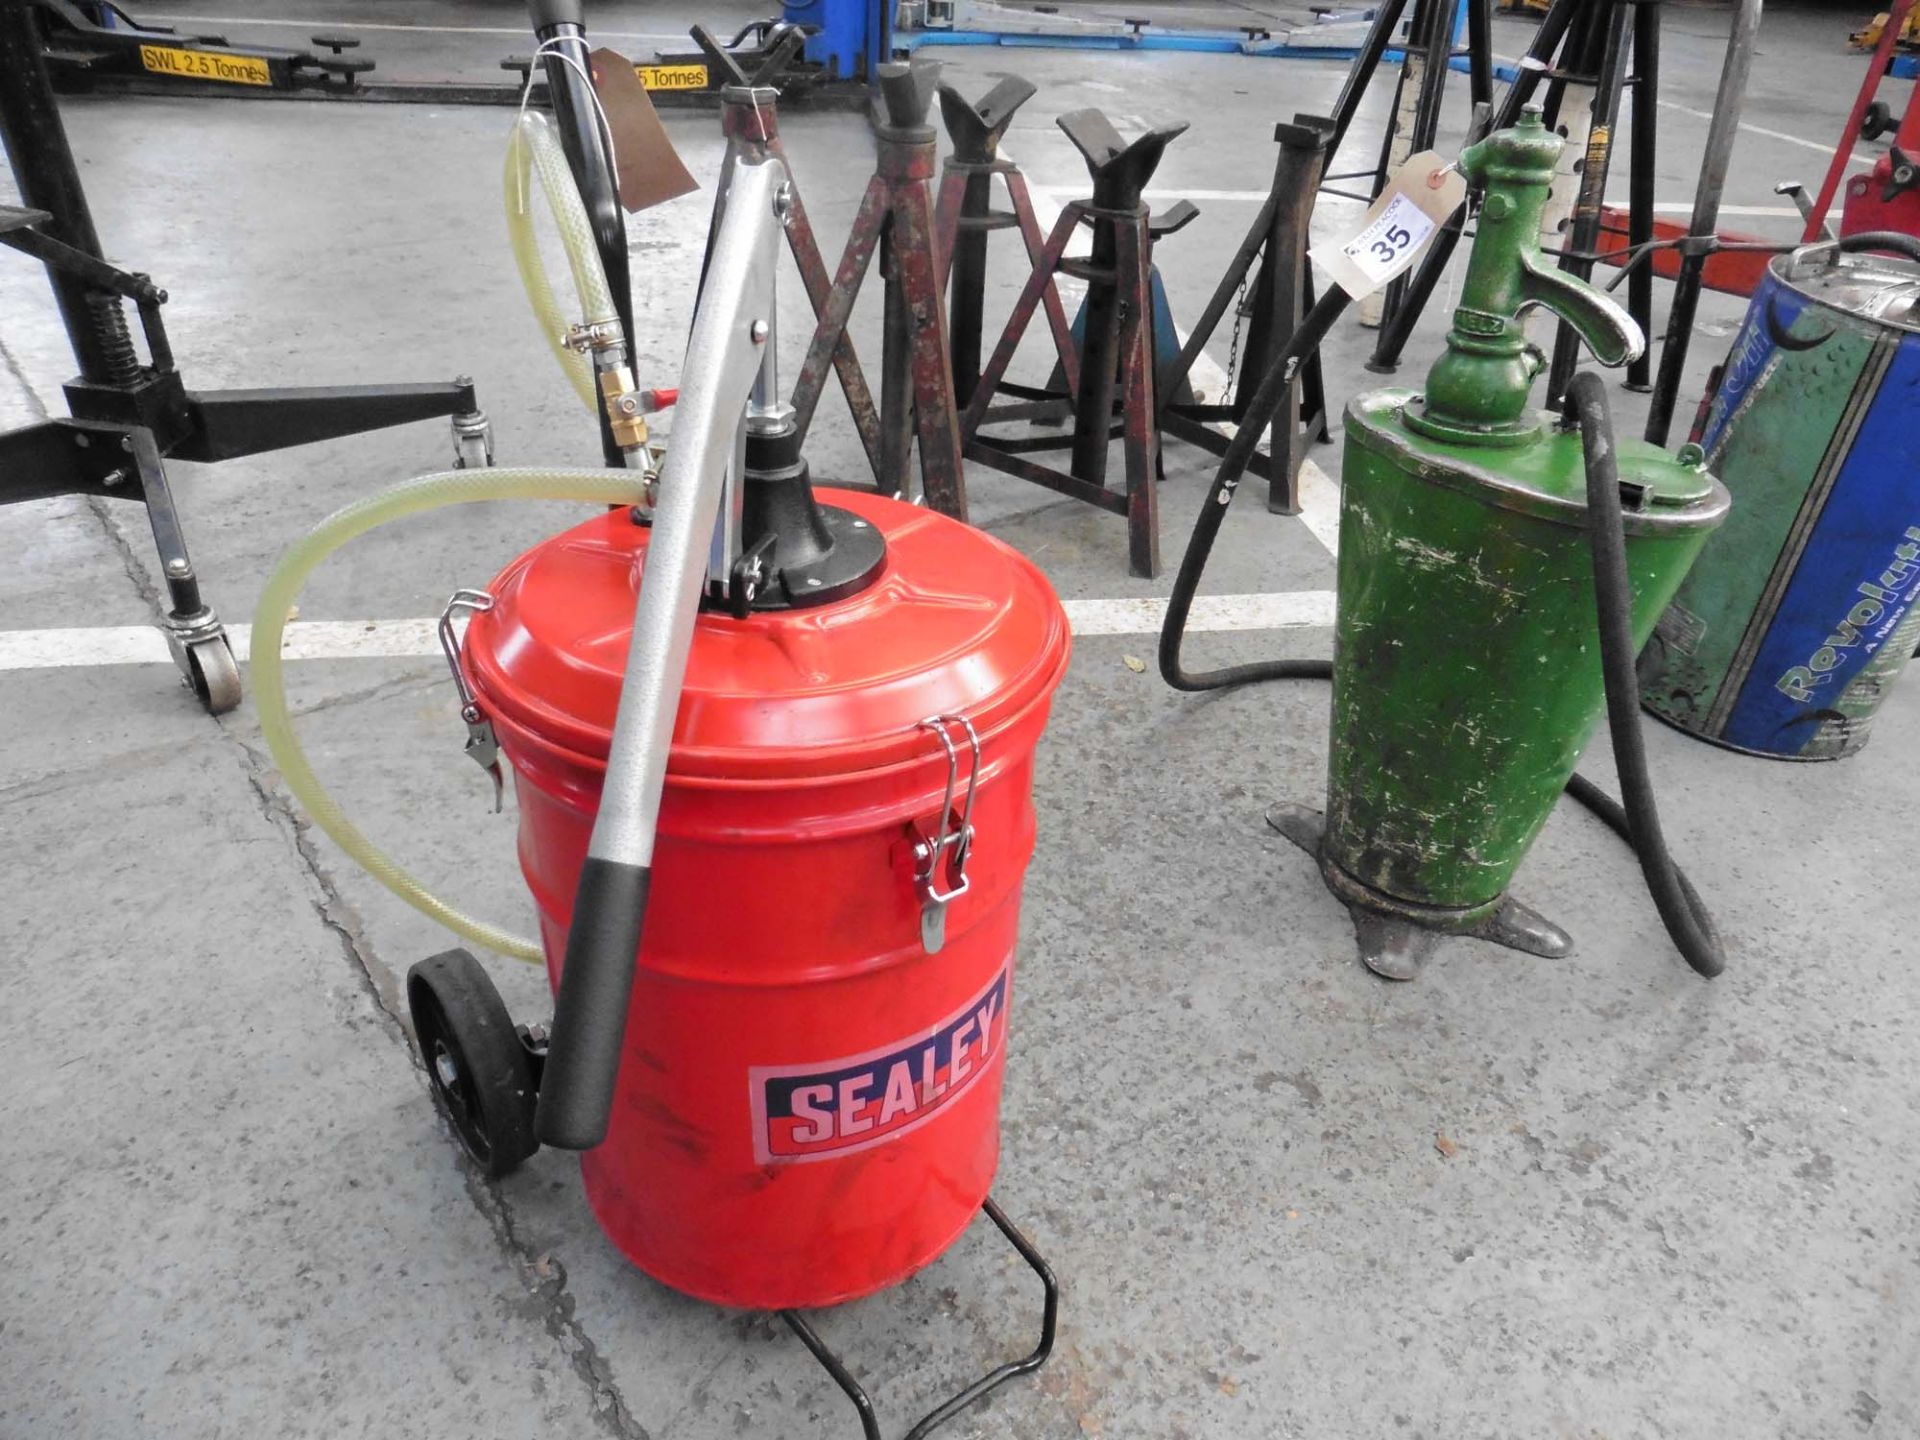 Sealey grease bucket on stand